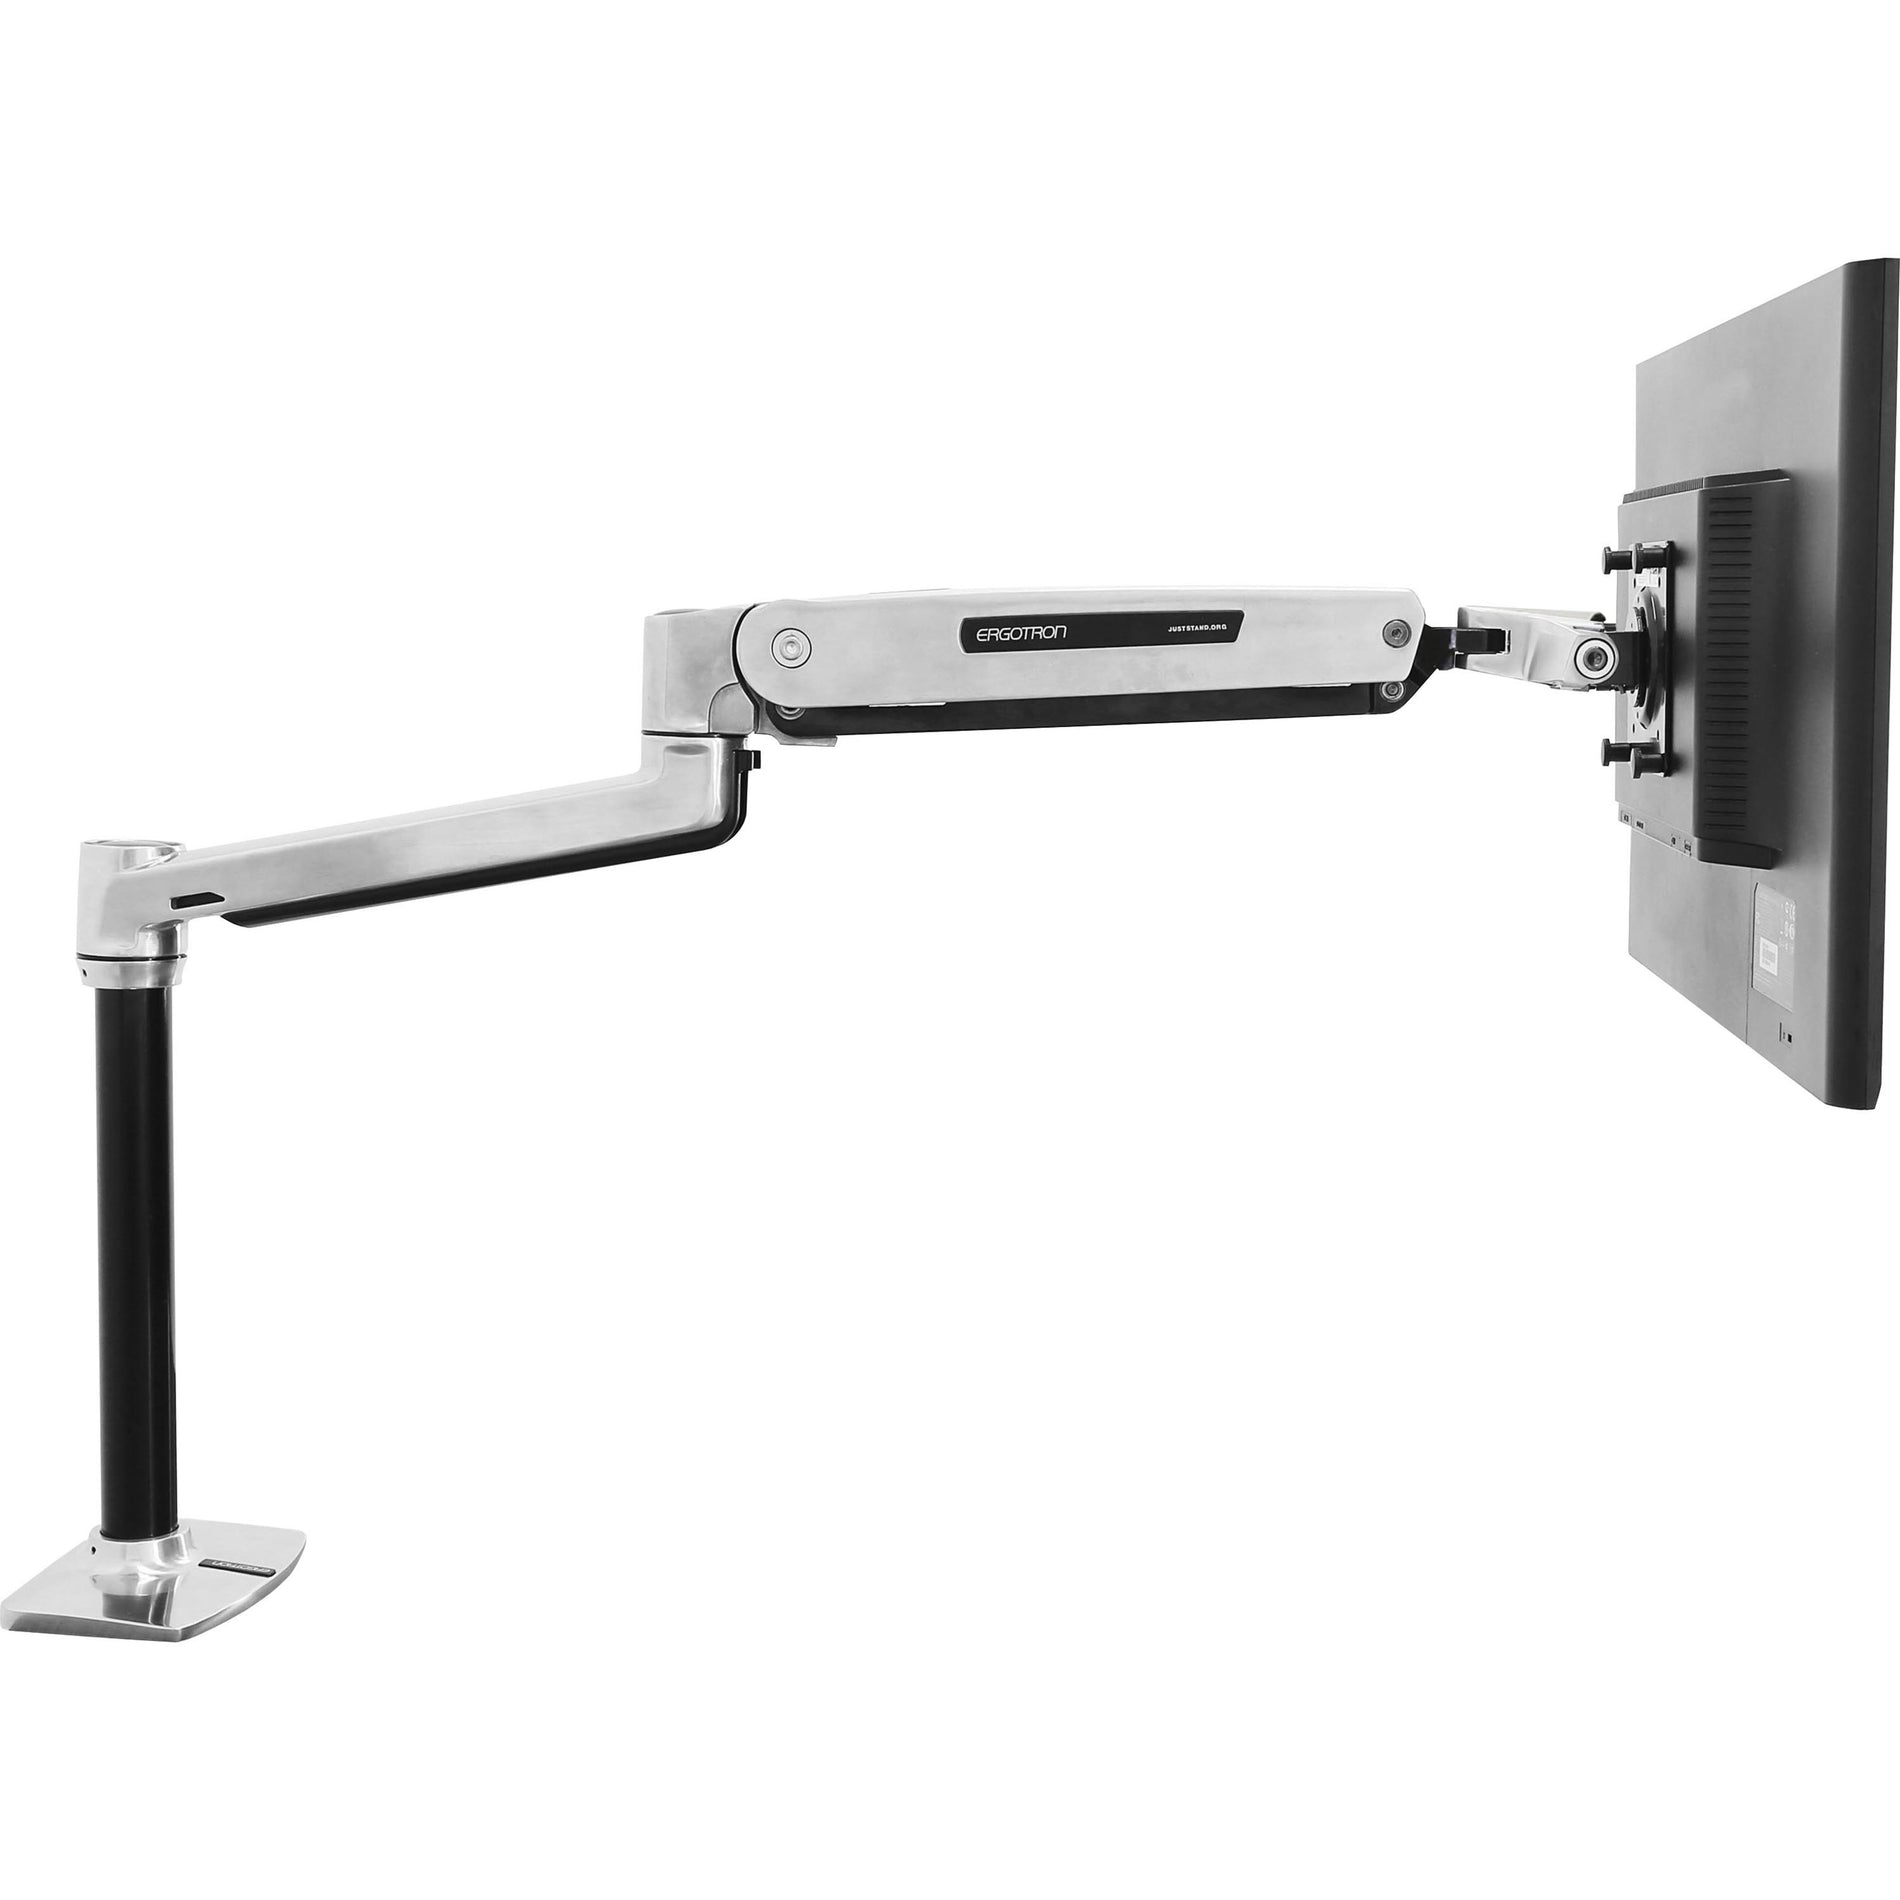 Ergotron 45-360-026 LX Sit-Stand Desk Mount LCD Arm Polished, Adjustable Height, Foldable, Cable Management